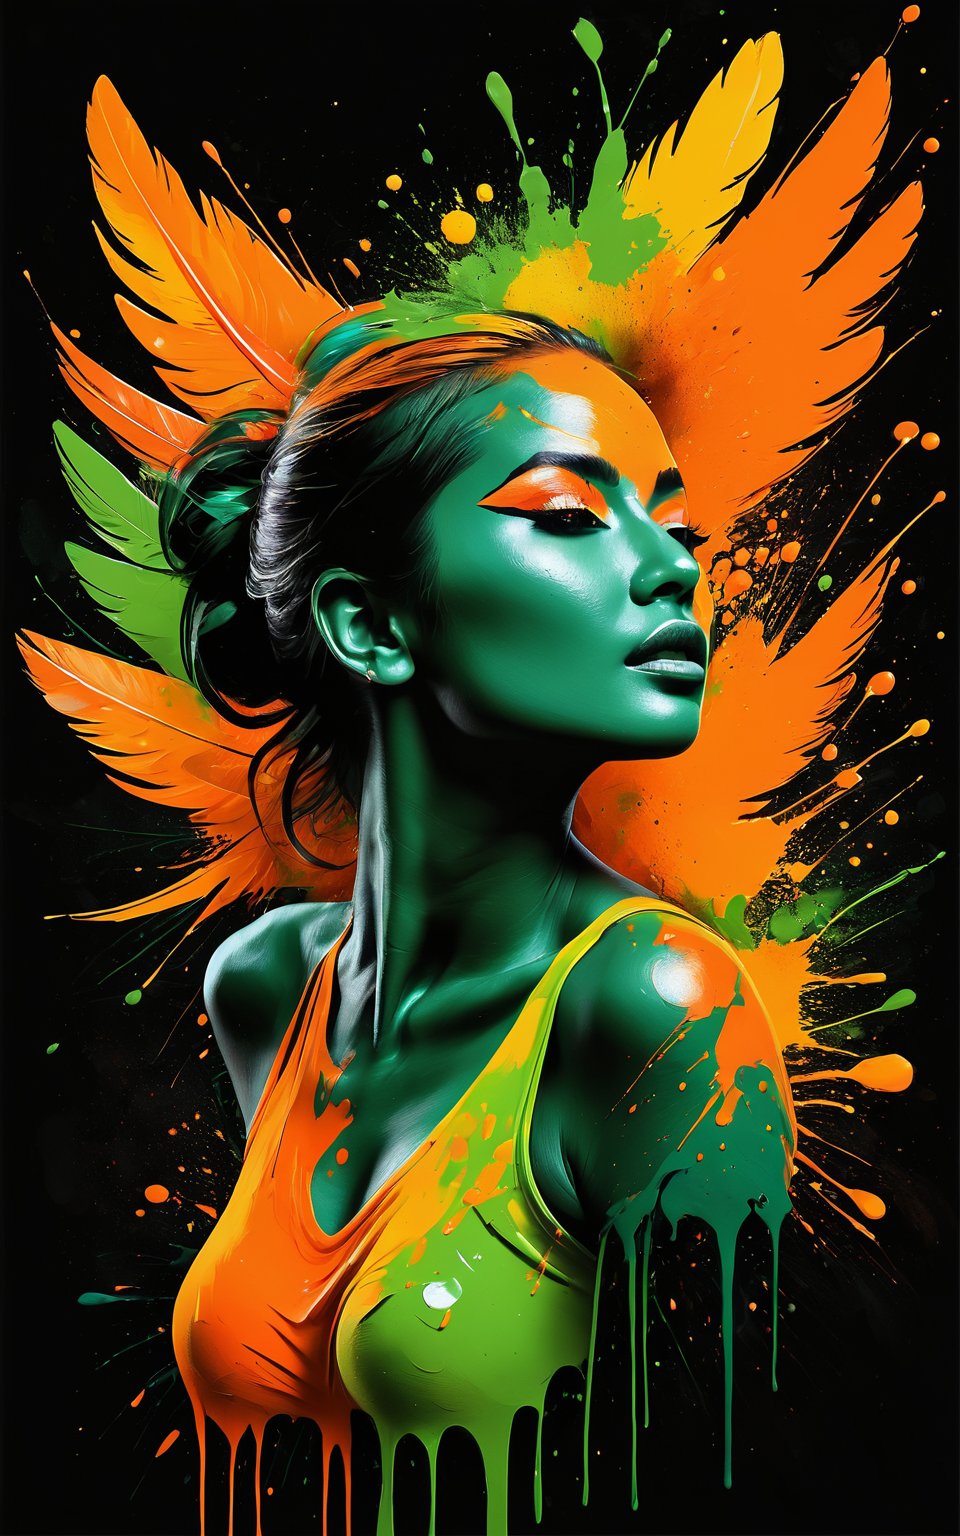 (Artistic bird illustration, high resolution, painted style, colored paint splatters), a [woman] depicted in a painted style with dynamic and vibrant paint splatters. The main colors are [orange] and [green], set against a [black] background. The artwork captures the lively essence of the [woman] through the use of bold paint splatters, creating a visually striking and energetic composition.